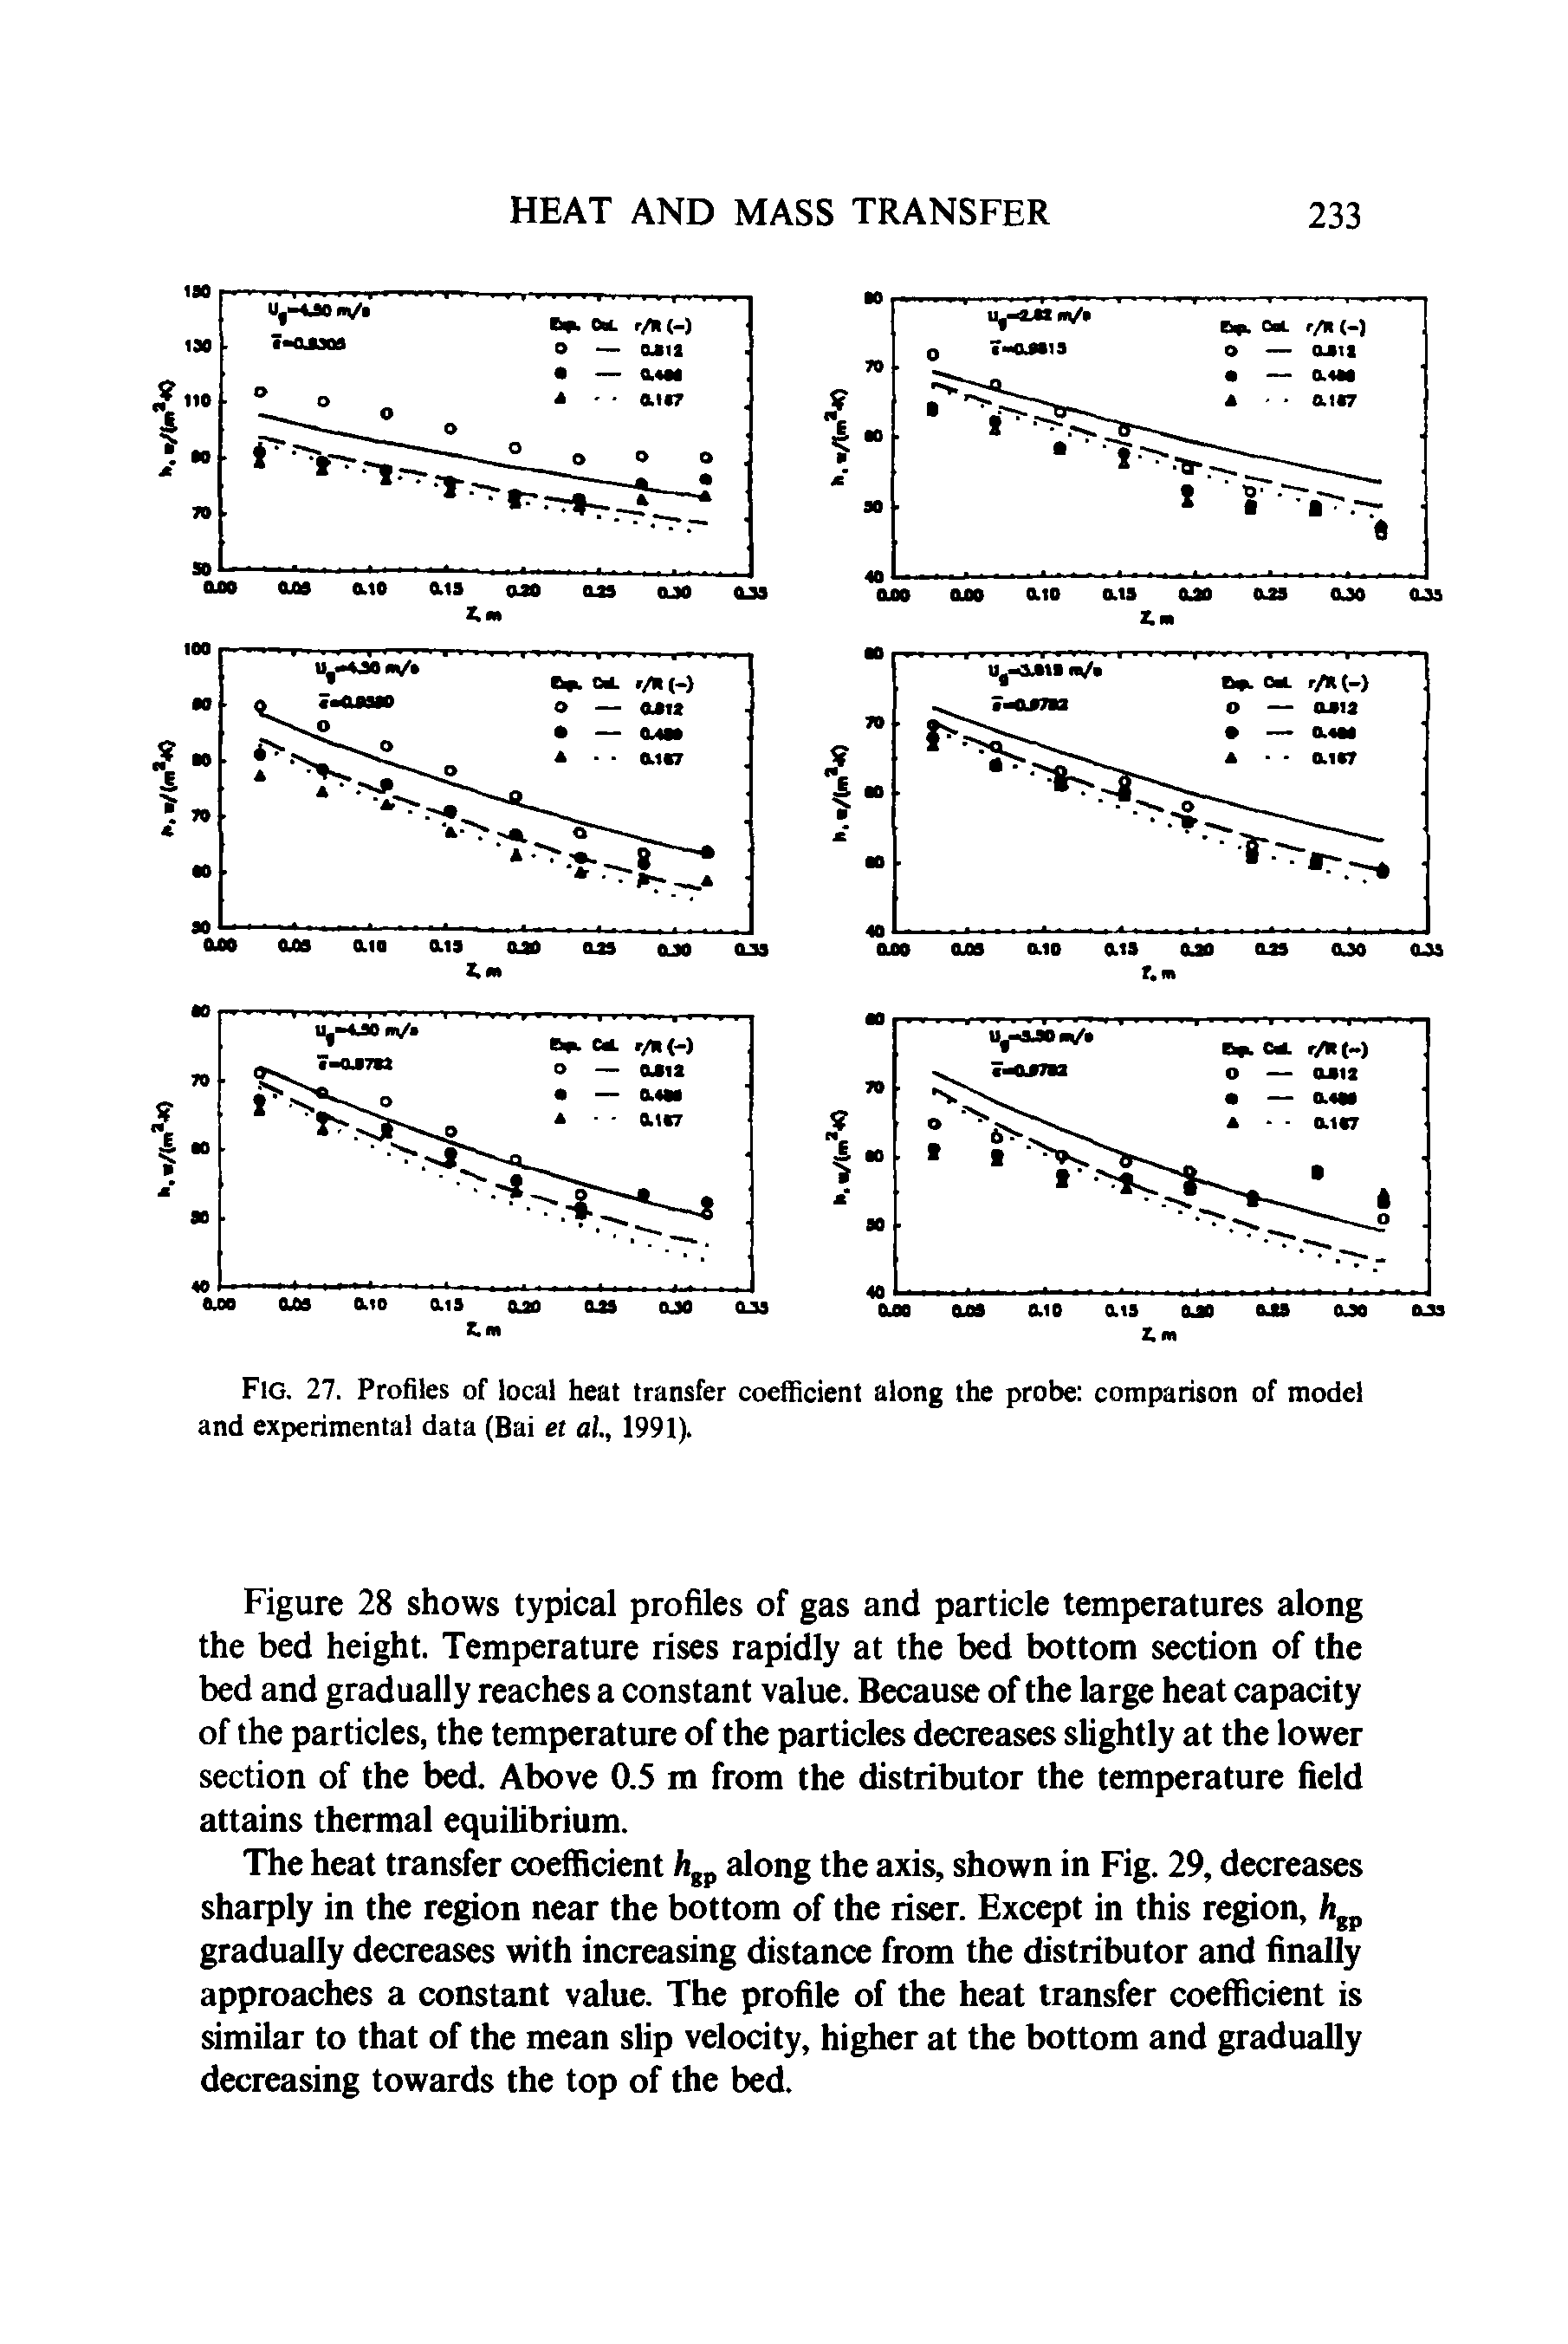 Fig. 27. Profiles of local heat transfer coefficient along the probe comparison of model and experimental data (Bai et al, 1991).